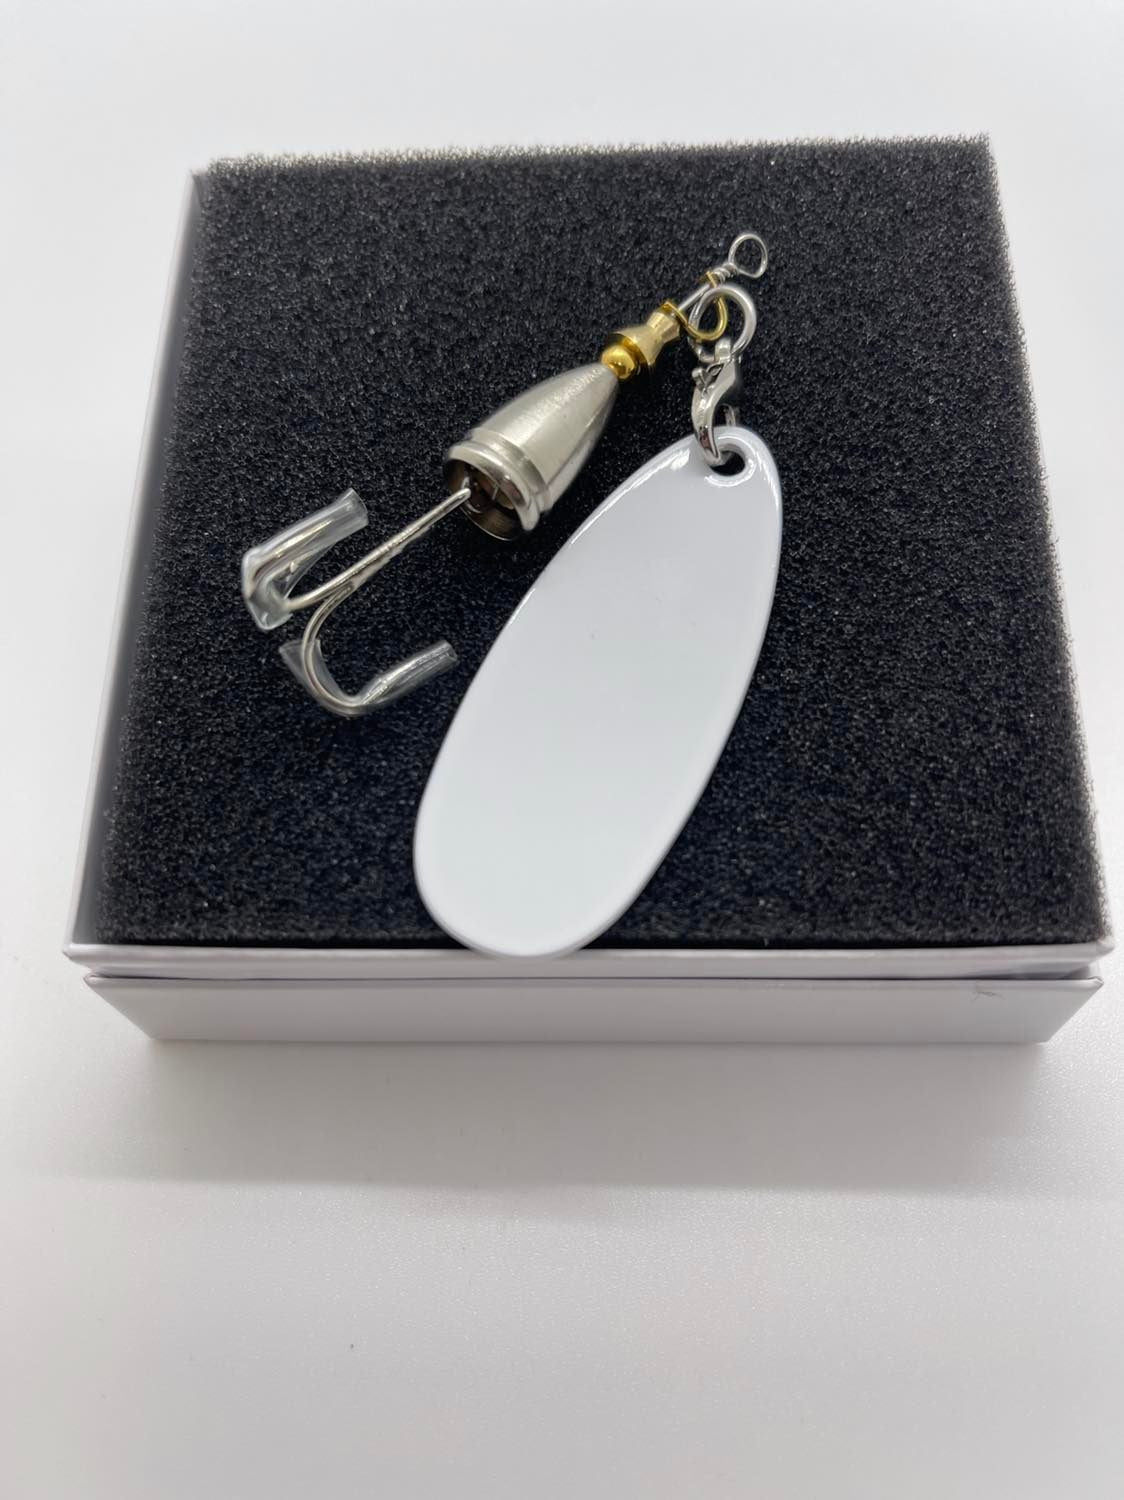 SUBLIMATION FISHING LURE (read description for shipping options